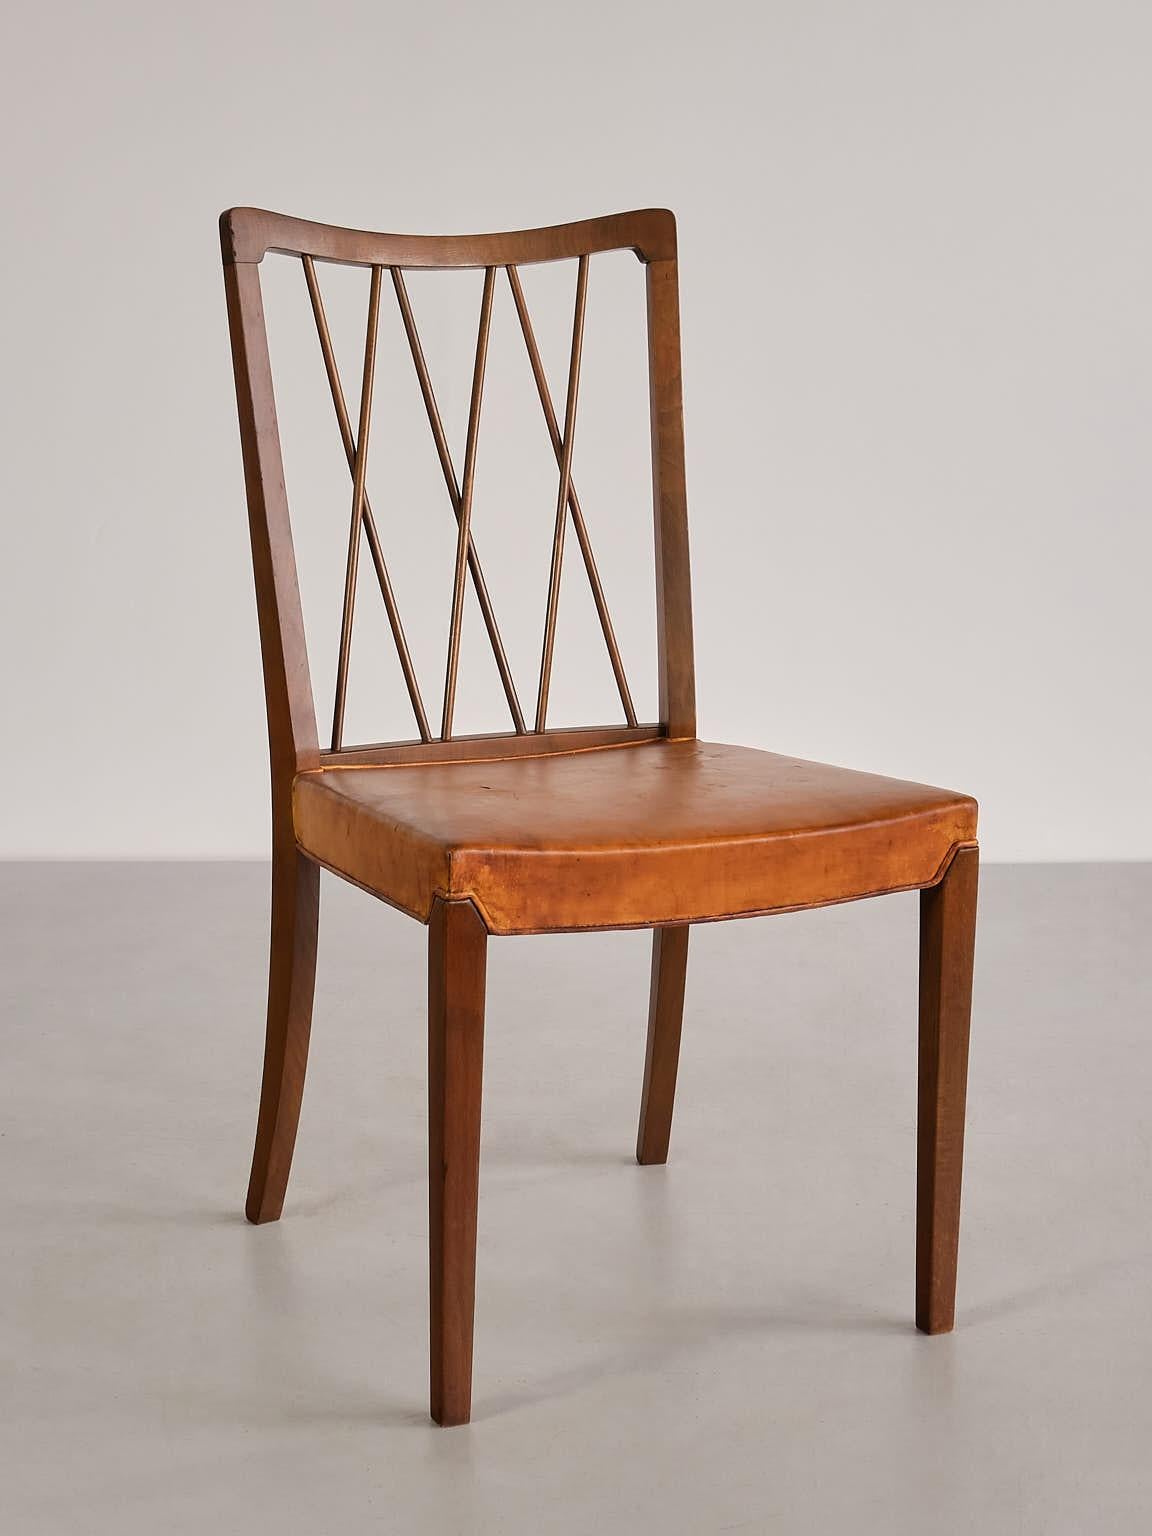 Set of Eight Frode Holm Dining Chairs, Walnut and Leather, Illum, Denmark, 1940s For Sale 1